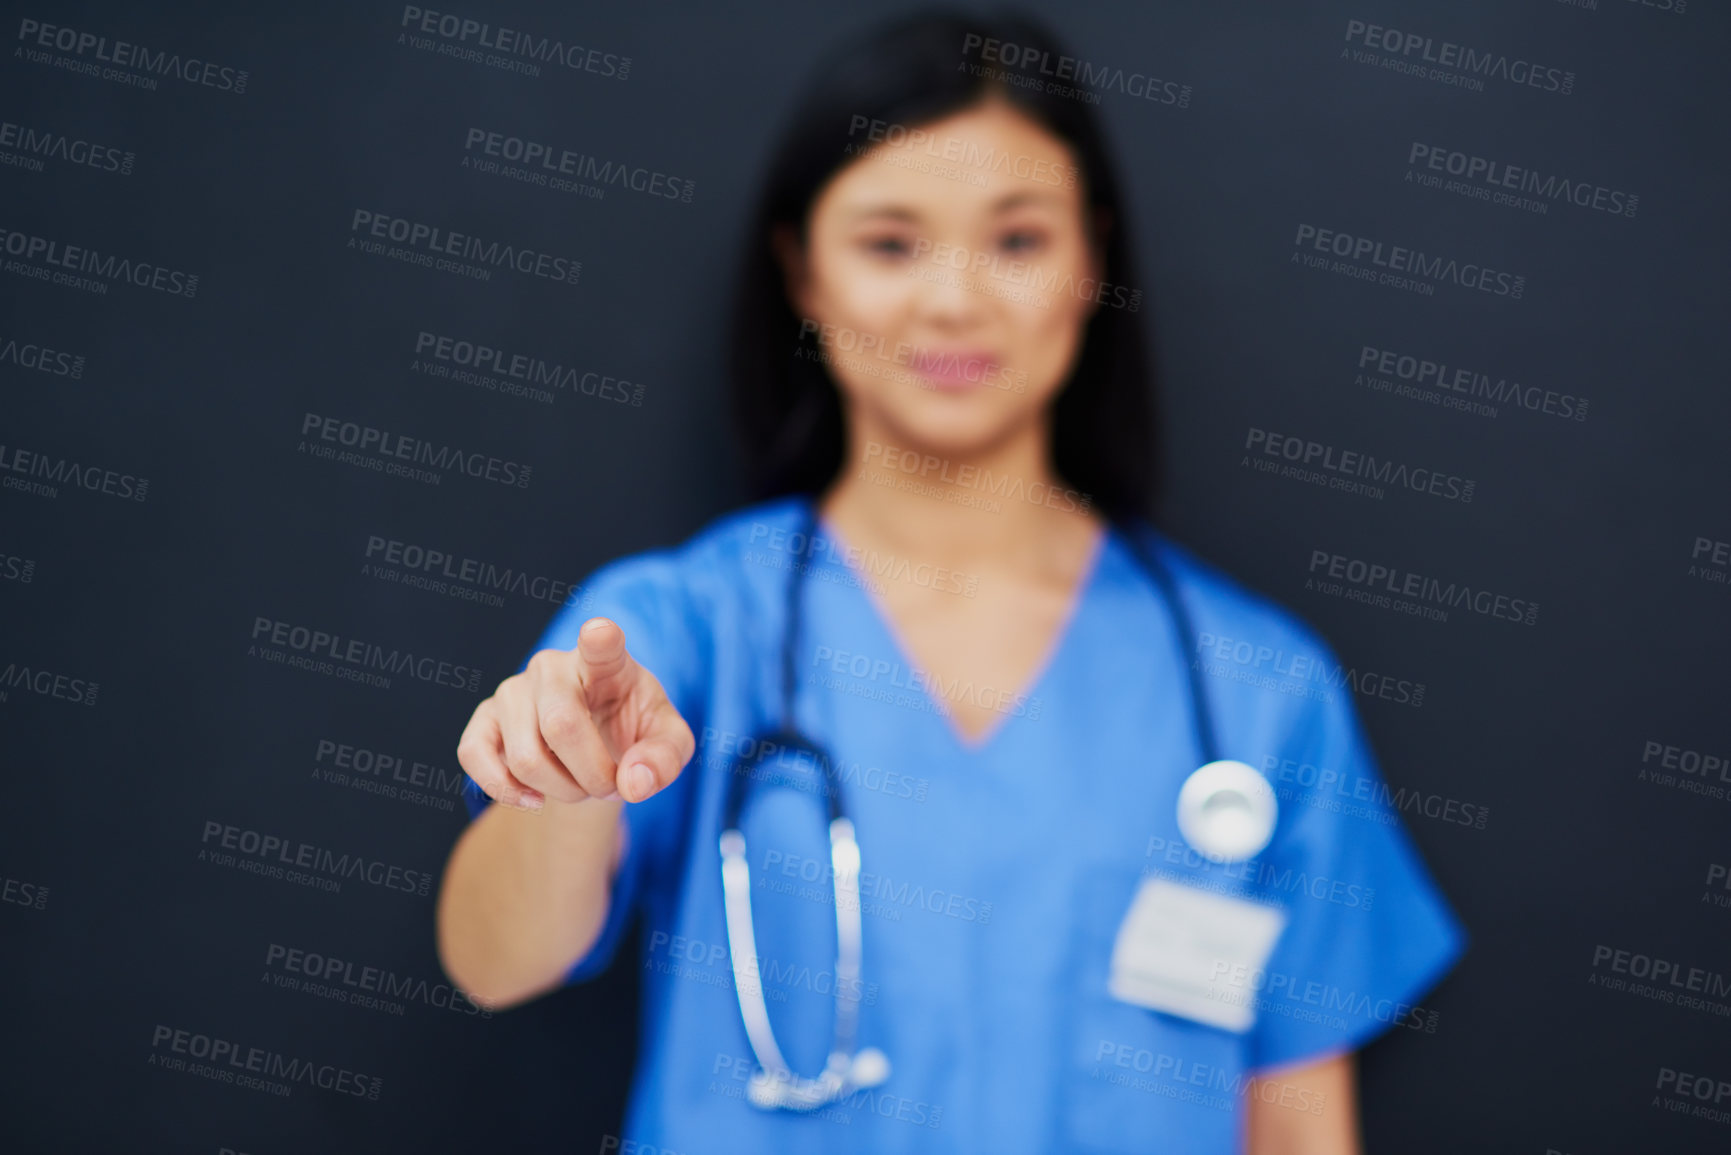 Buy stock photo Cropped portrait of a blurred out female nurse using a touchscreen interface while standing against a black background